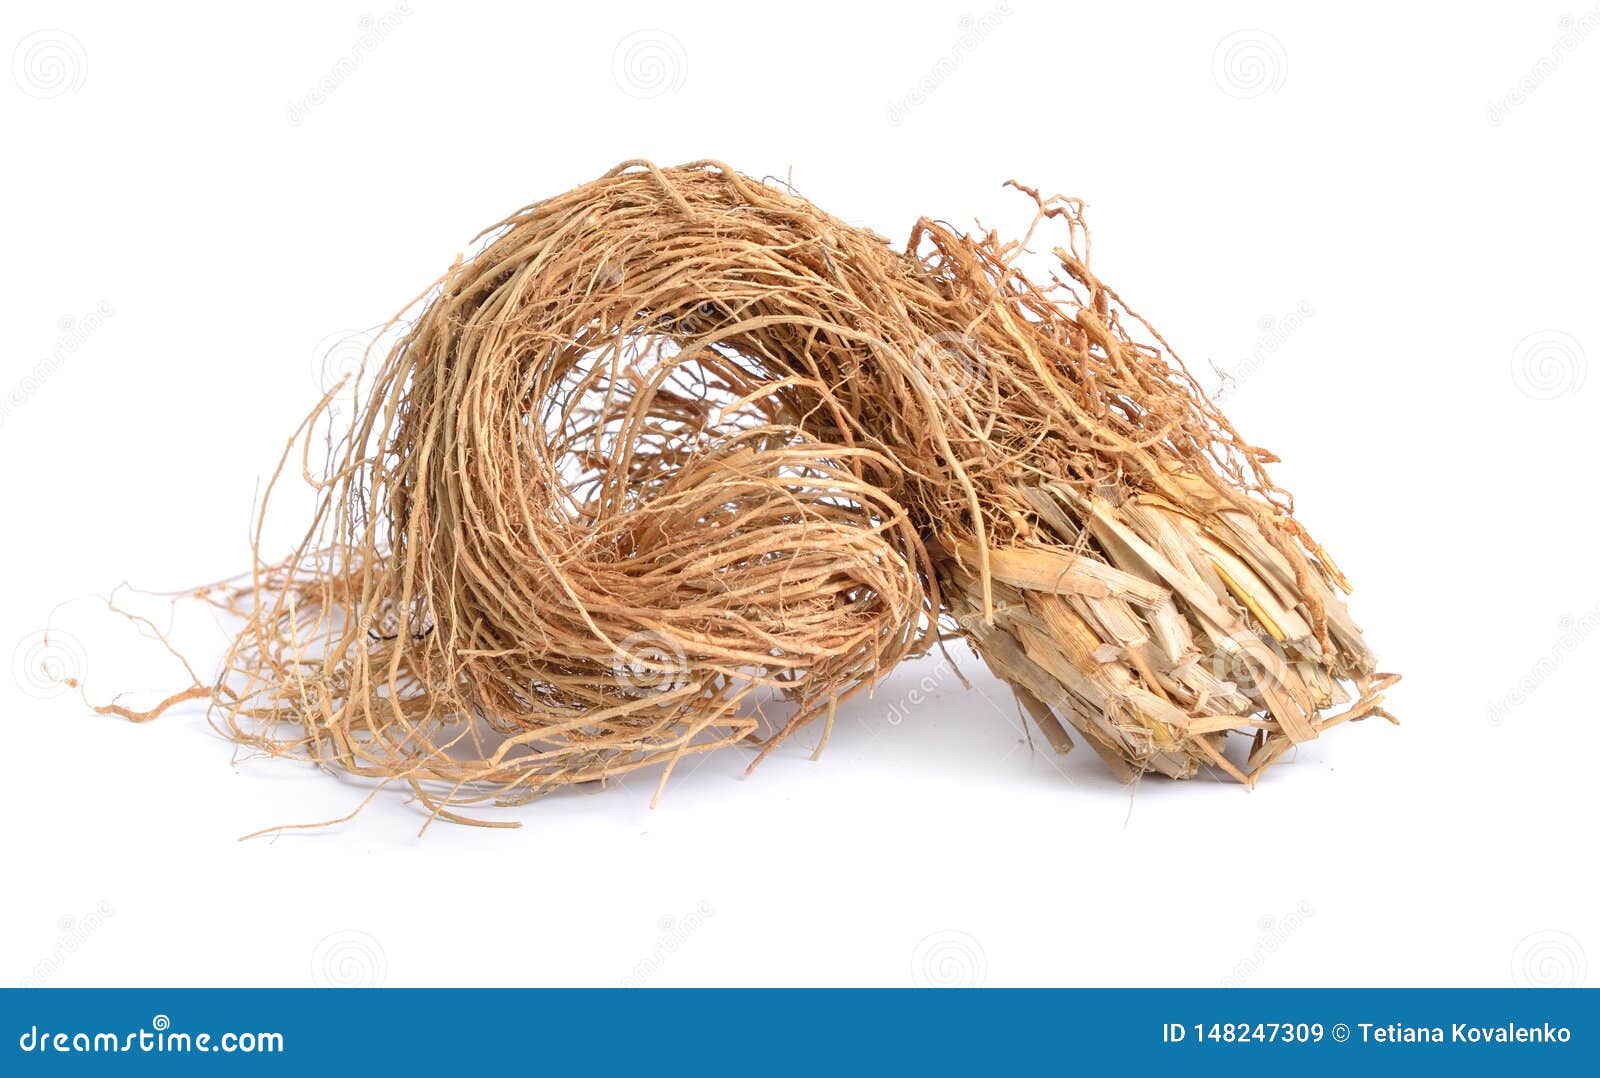 roots of chrysopogon zizanioides, commonly known as vetiver.  on white background